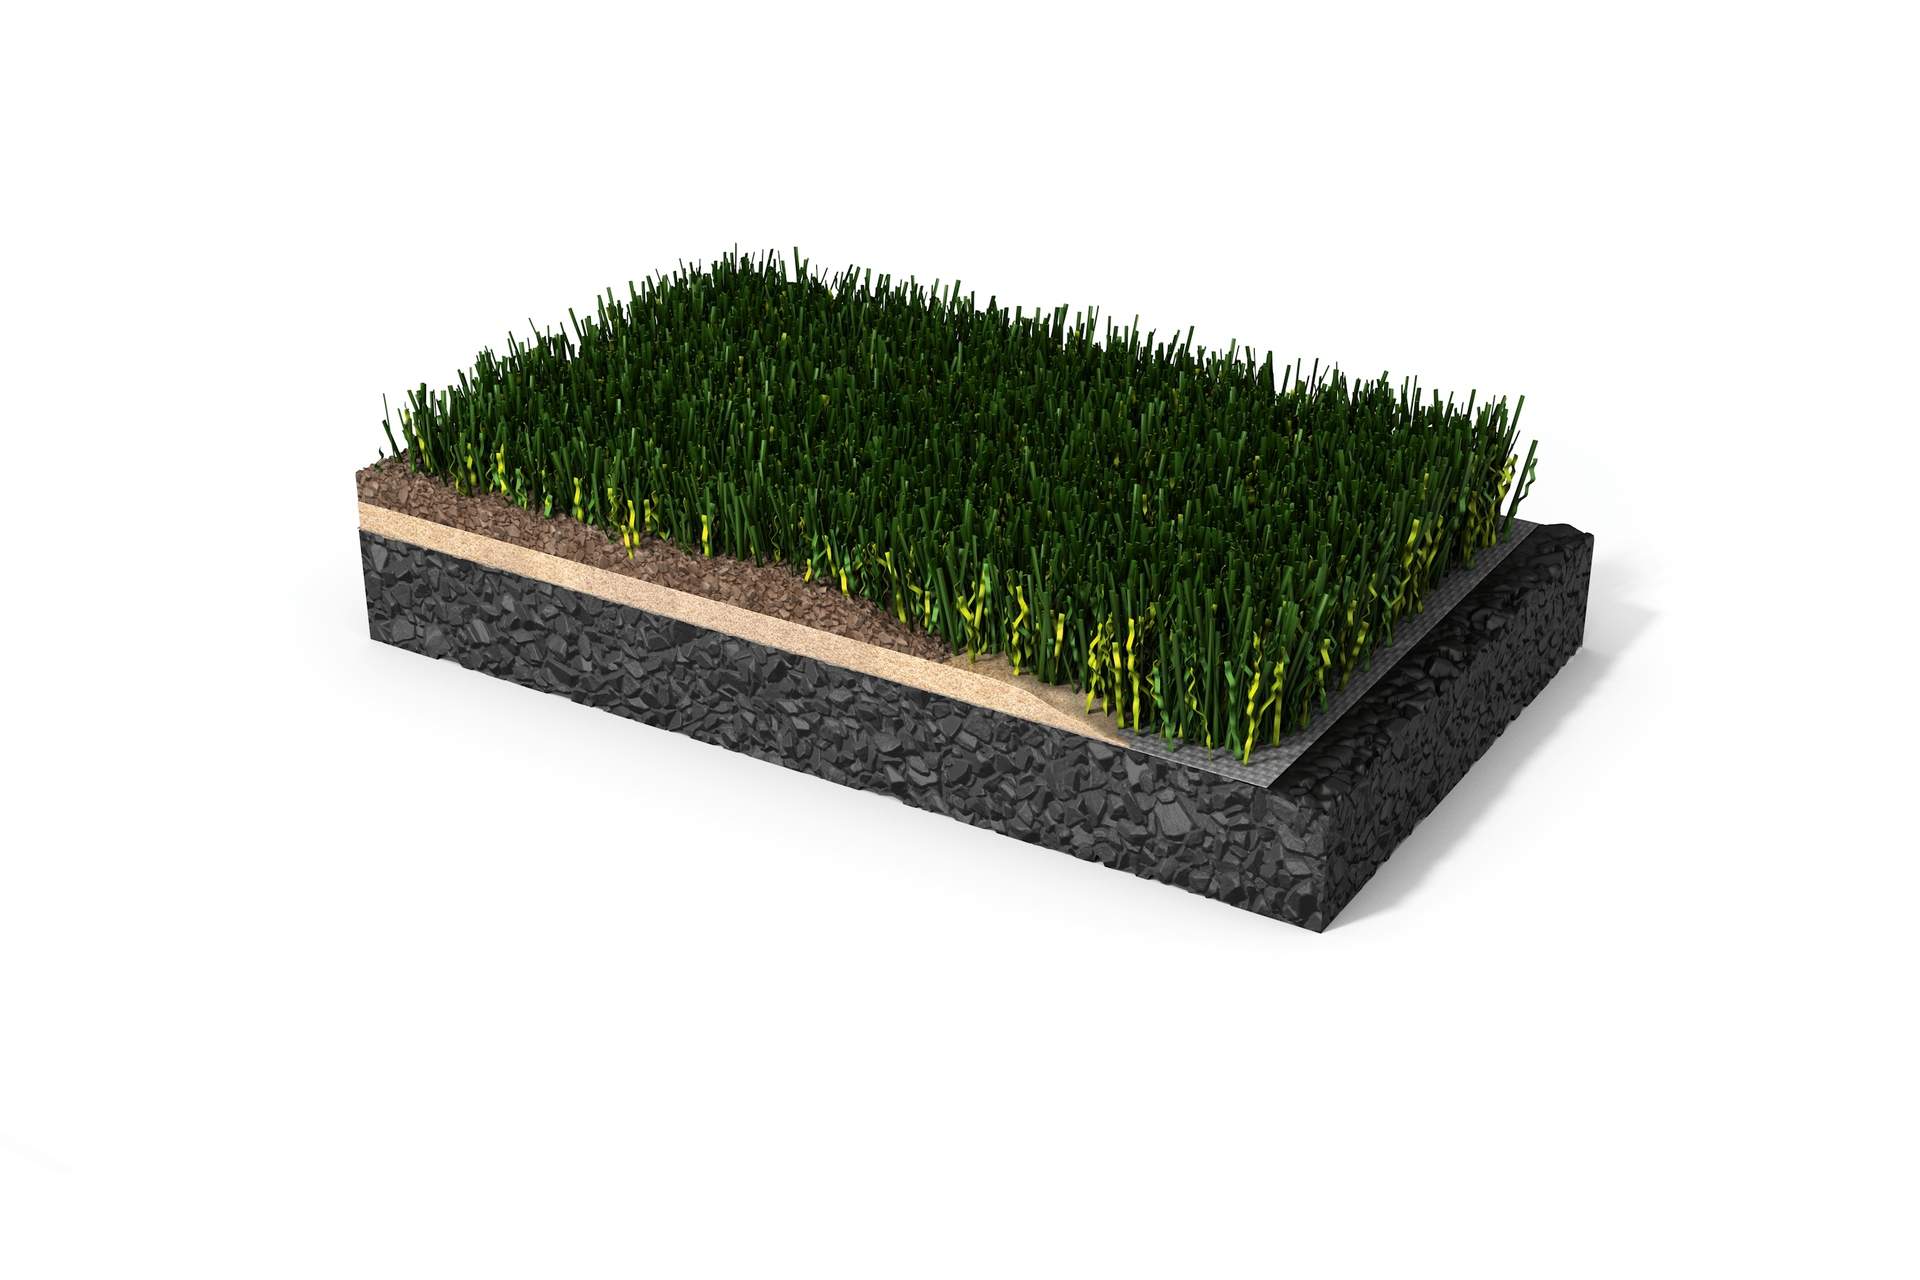 The first CO2-neutral football turf